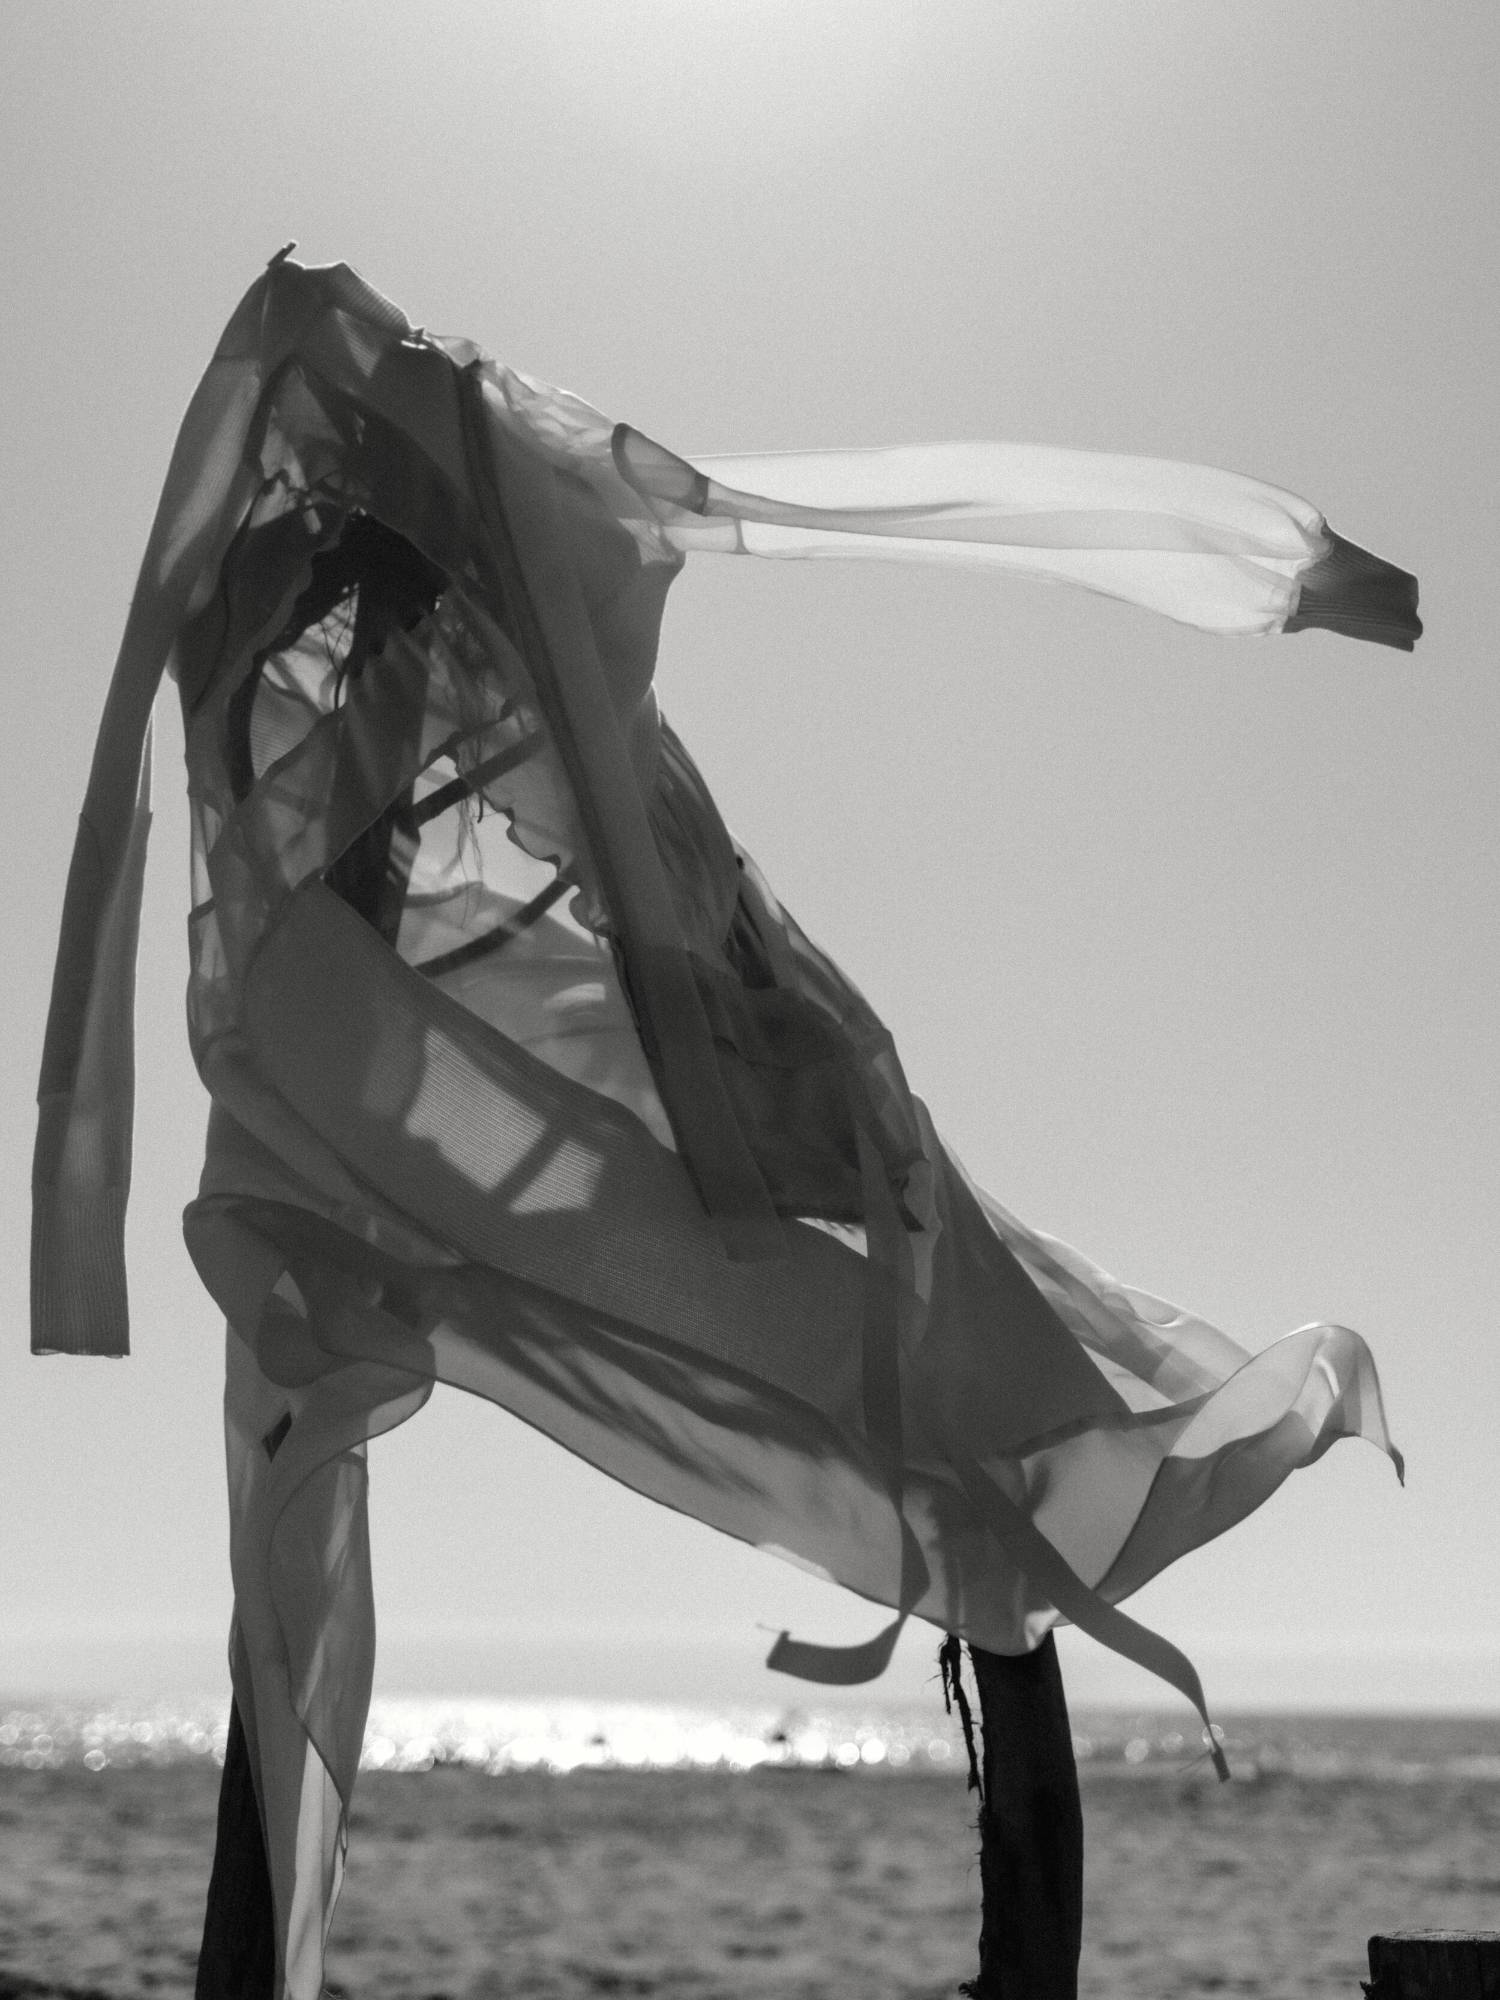 Clothing: Dress by Sacai. Photographer: Charlotte Lapalus. Stylist: Giulia Querenghi. Location: Camargue, France 